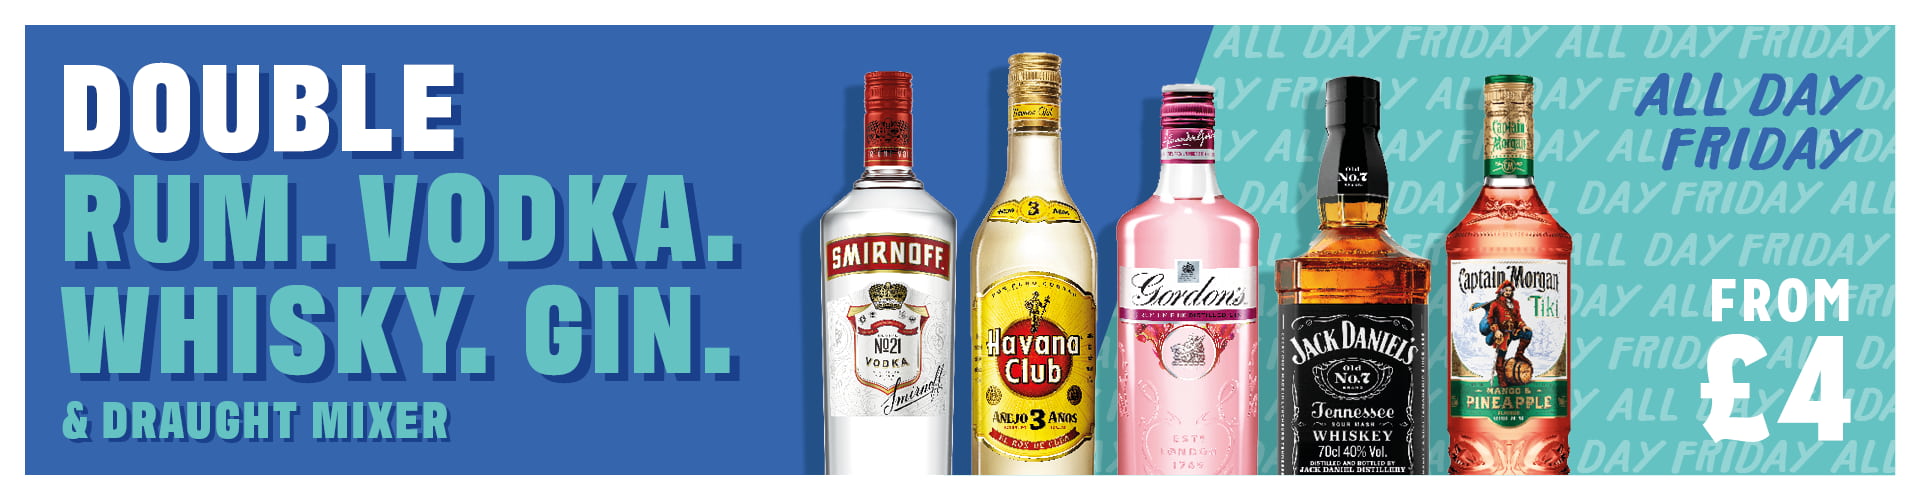 Double rum, vodka, whisky or gin and mixer for just £4. Available all day Friday.